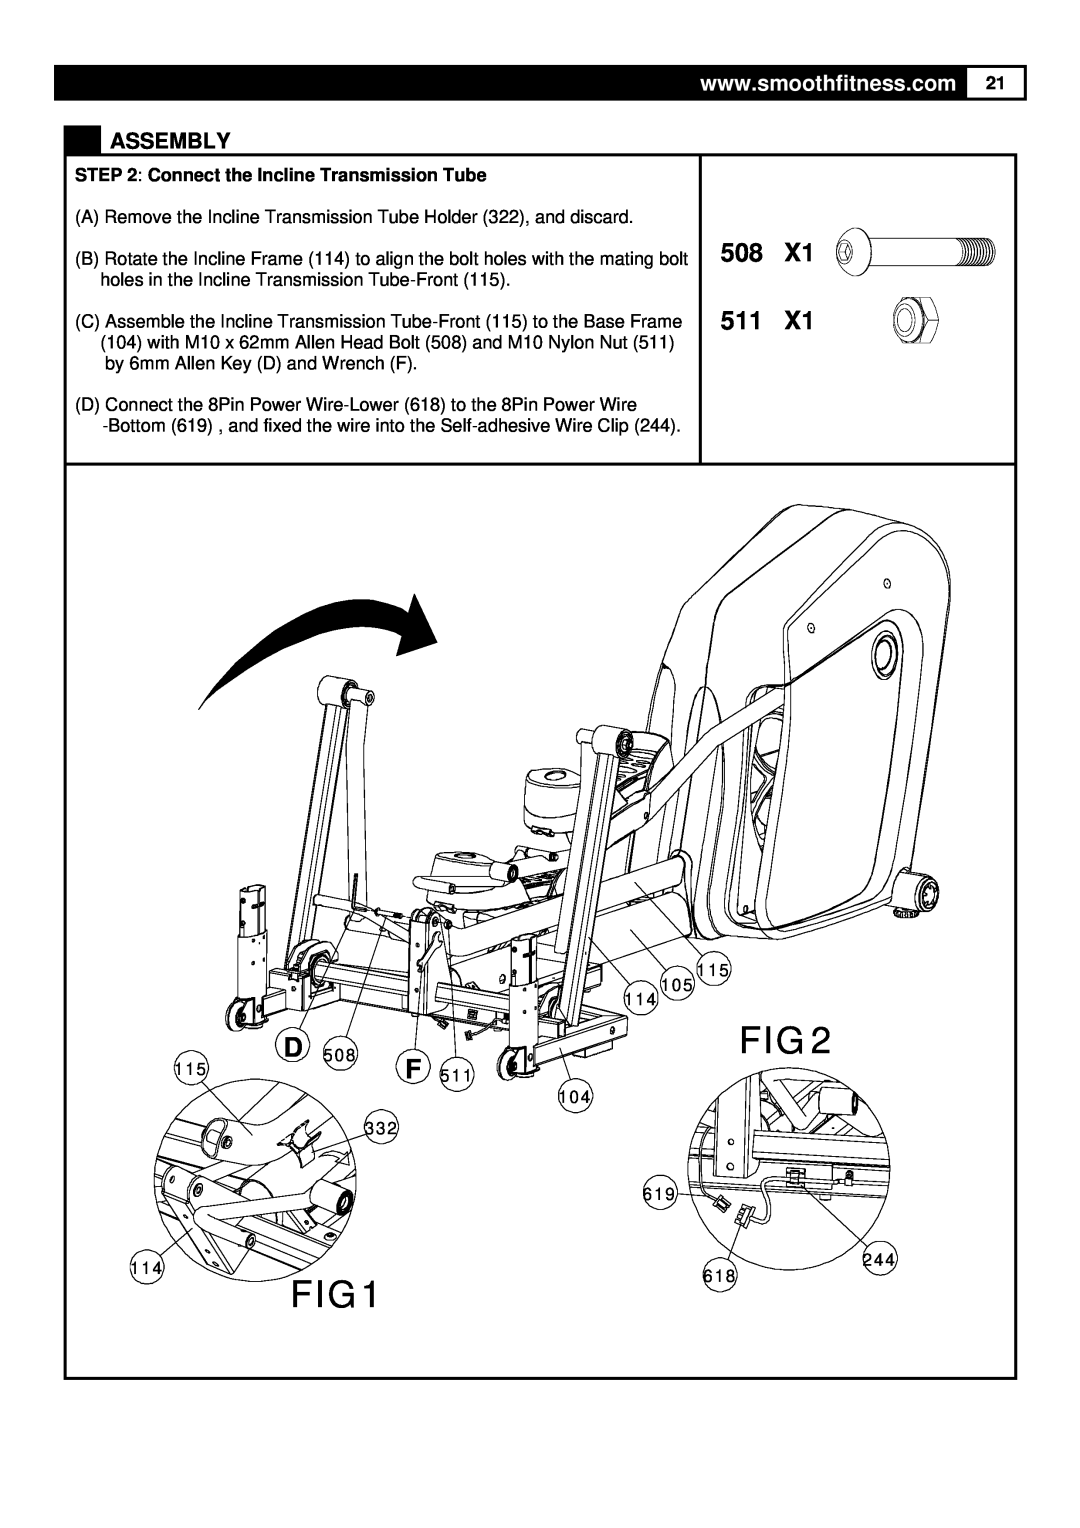 Smooth Fitness 9.25X user manual FIG2, FIG1, 508 511, Assembly, Connect the Incline Transmission Tube, 104 619 